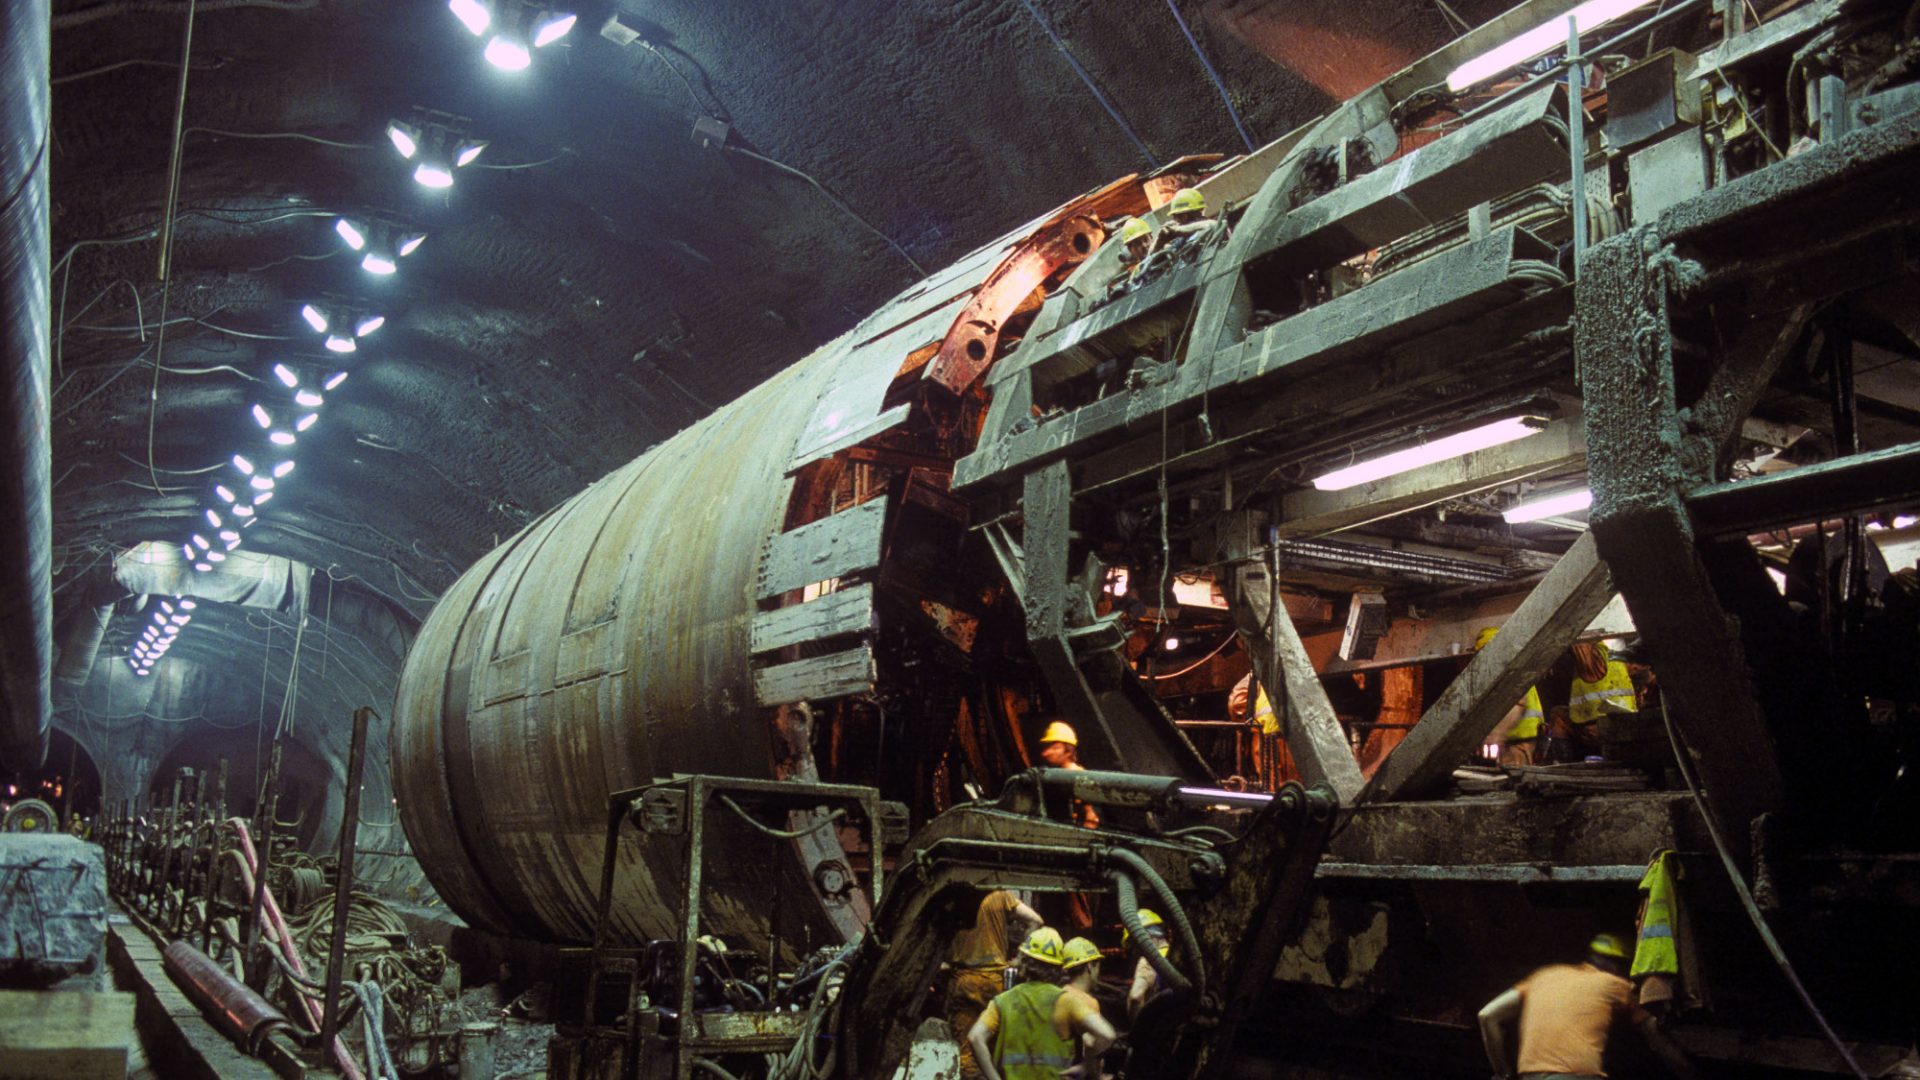 The machine used for boring during the construction of the Channel Tunnel, 1993. Photo: SSPL/Getty